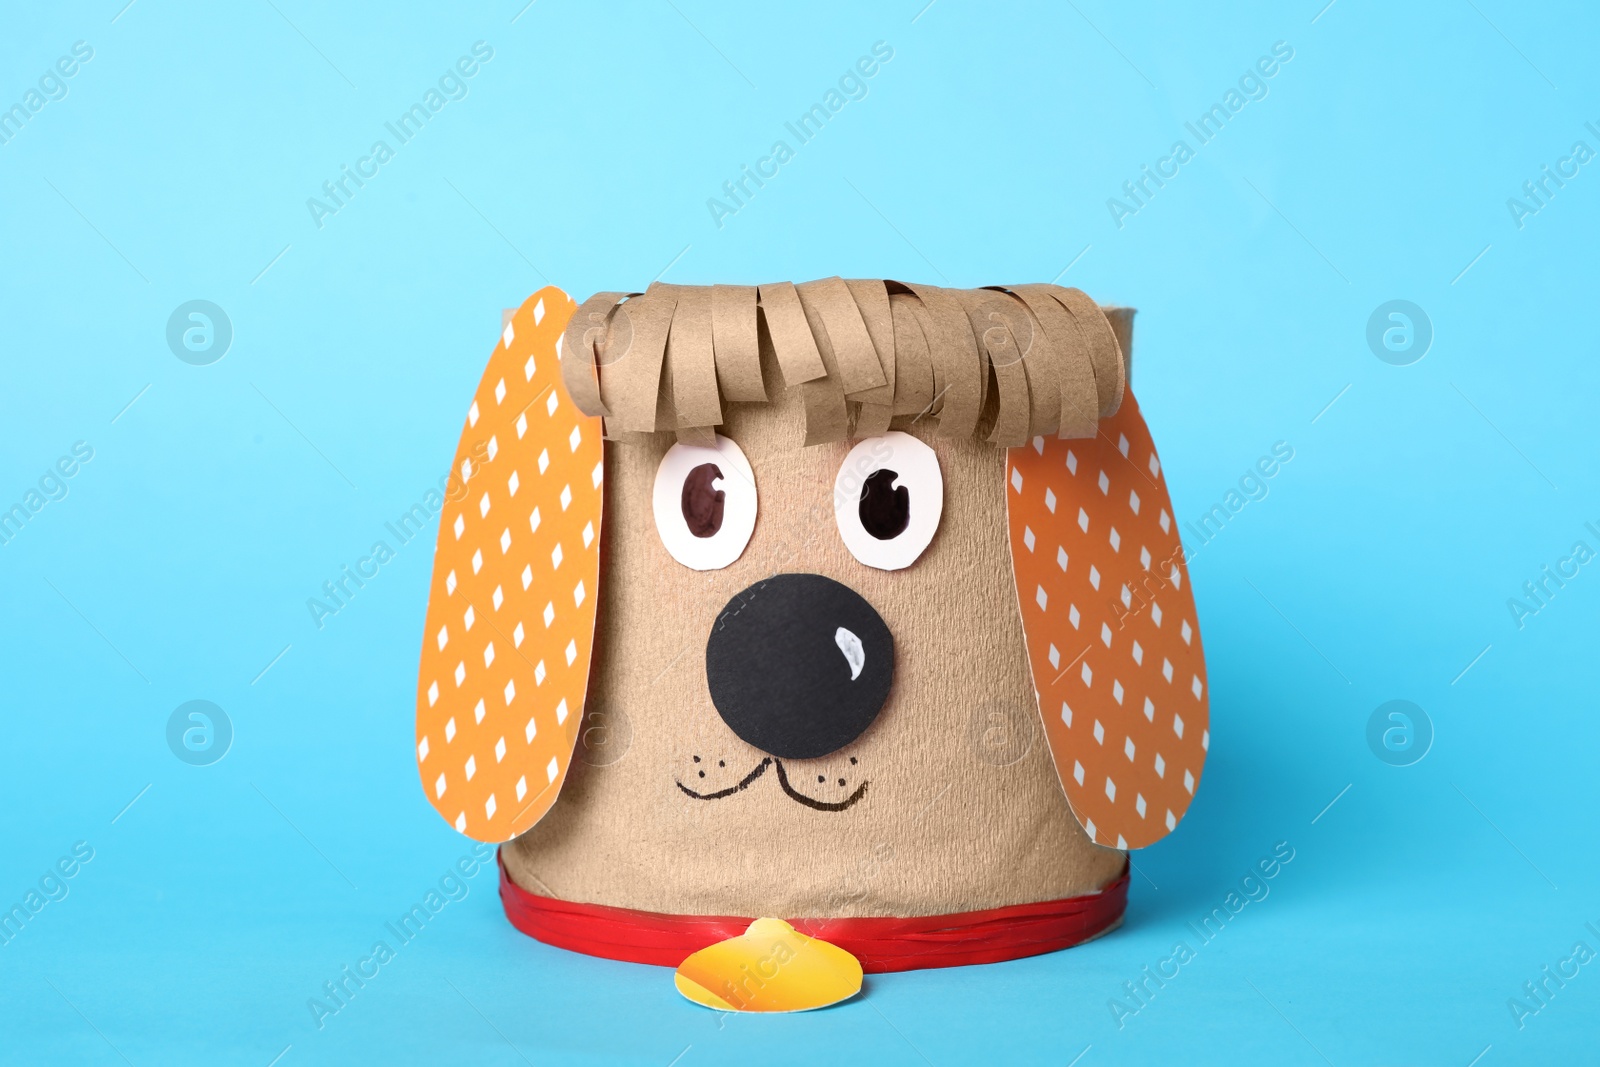 Photo of Toy dog made of toilet paper roll on light blue background